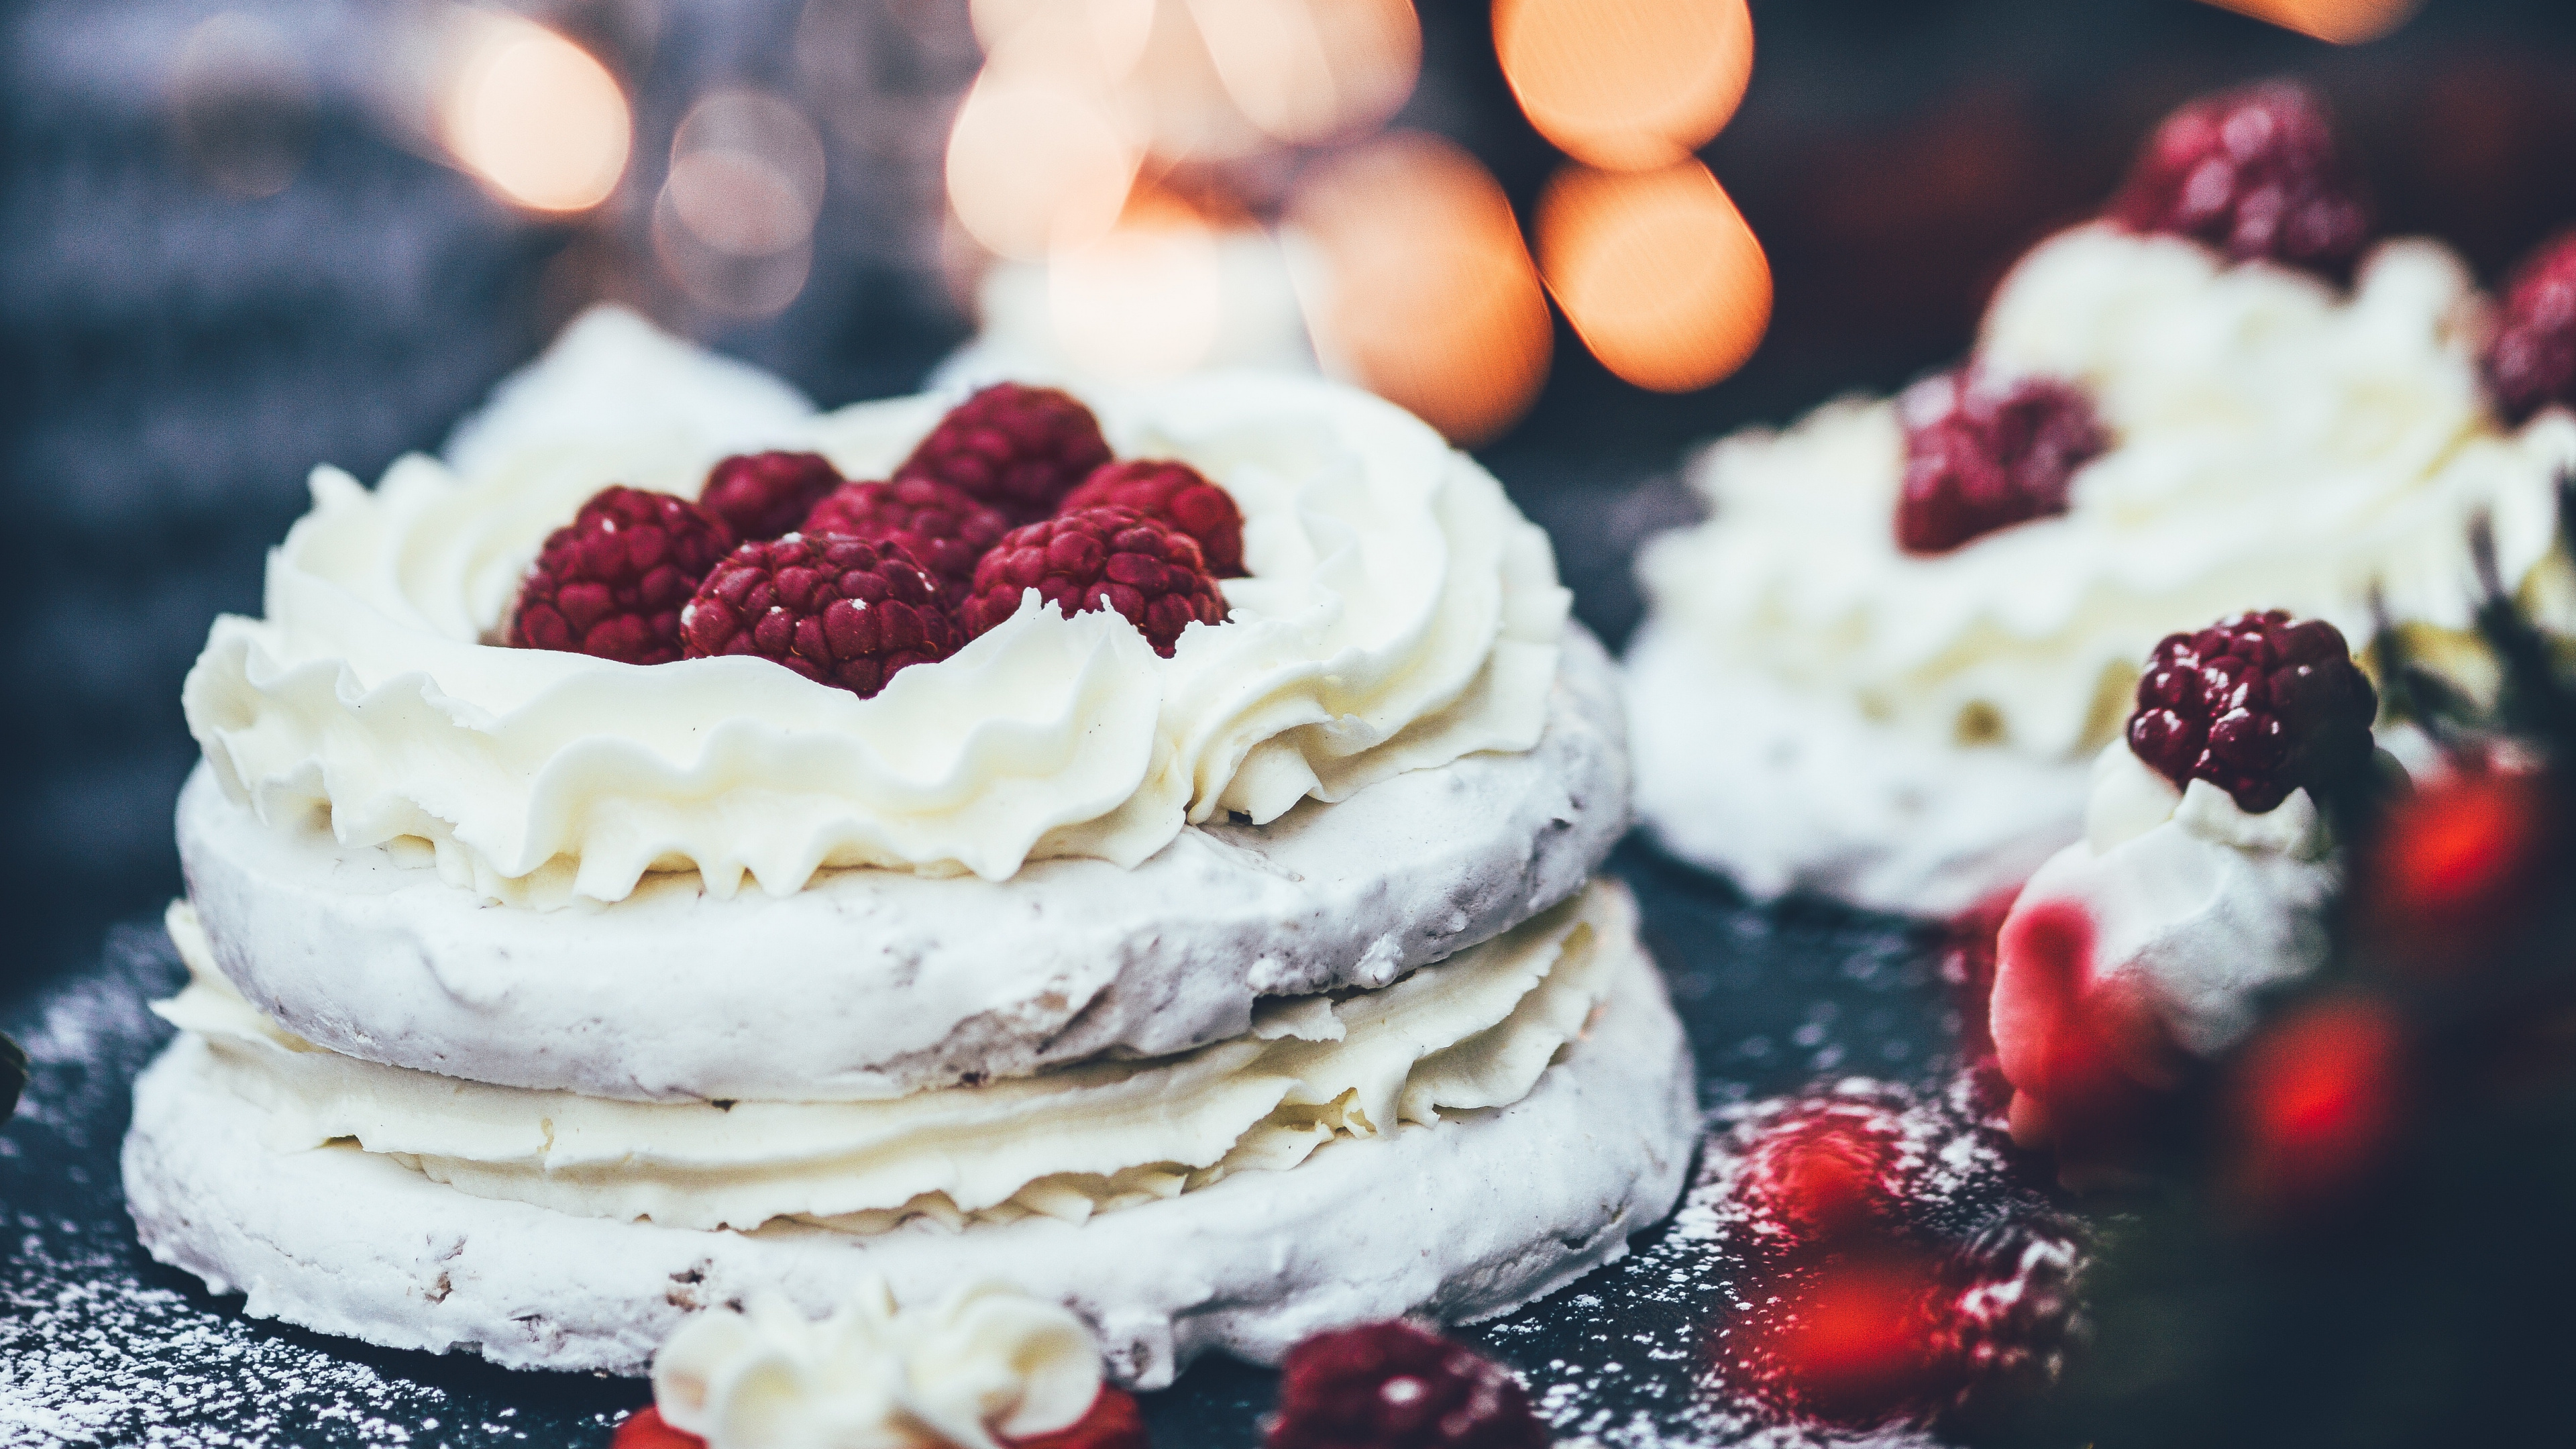 White and Red Cake With Red and White Sprinkles on Top. Wallpaper in 3840x2160 Resolution